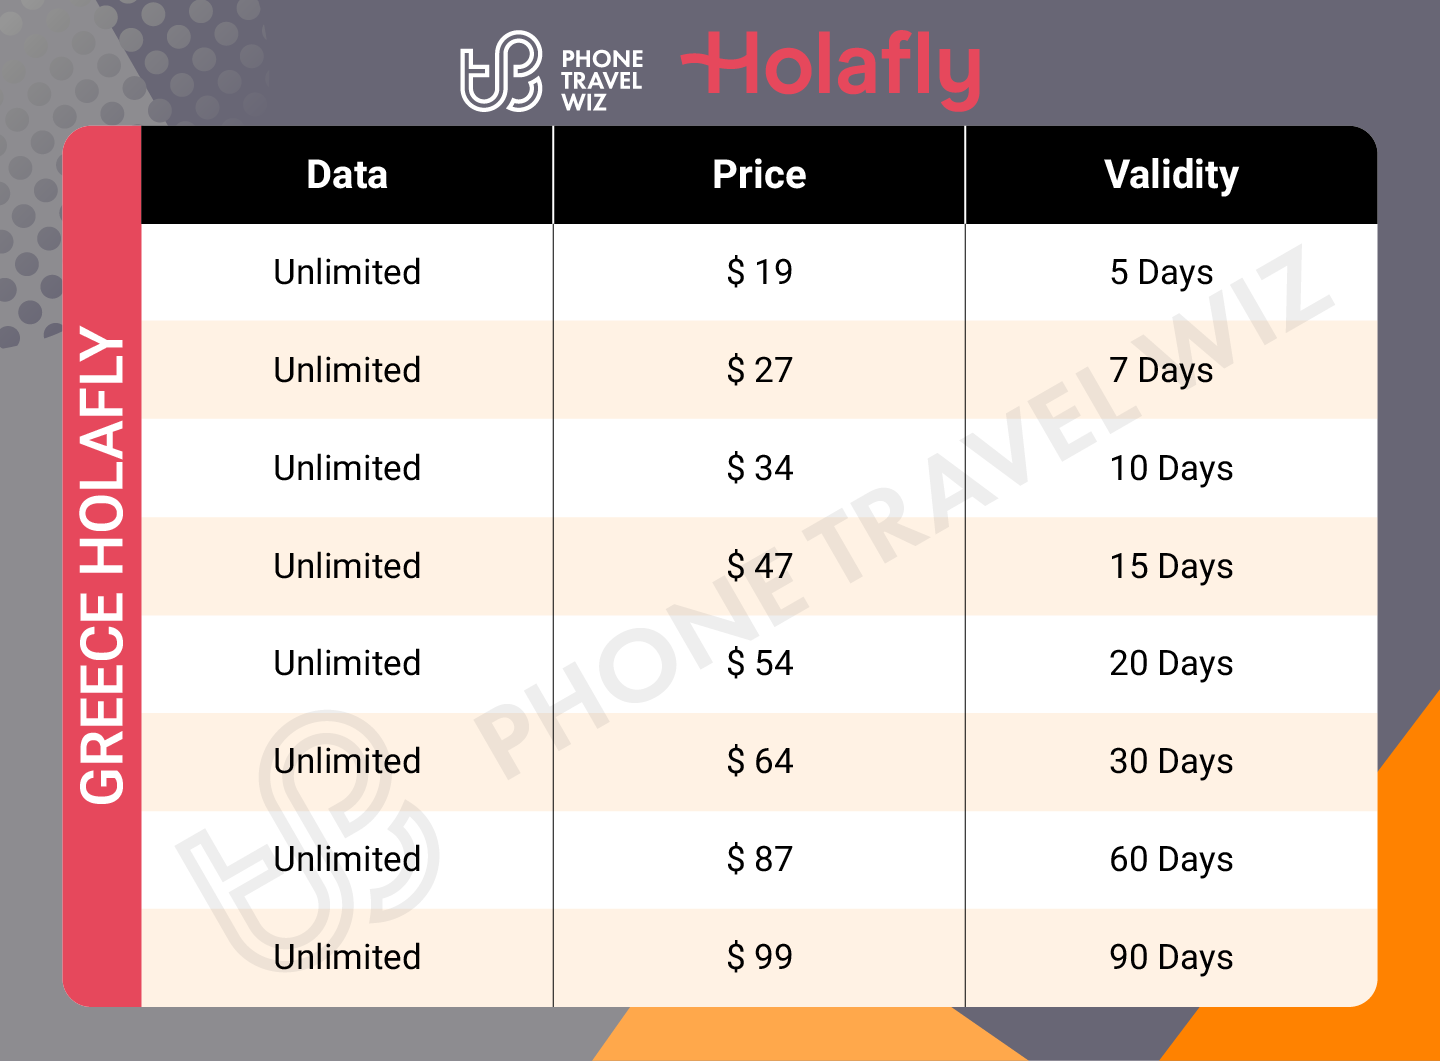 Holafly Greece eSIM Price & Data Details Infographic by Phone Travel Wiz